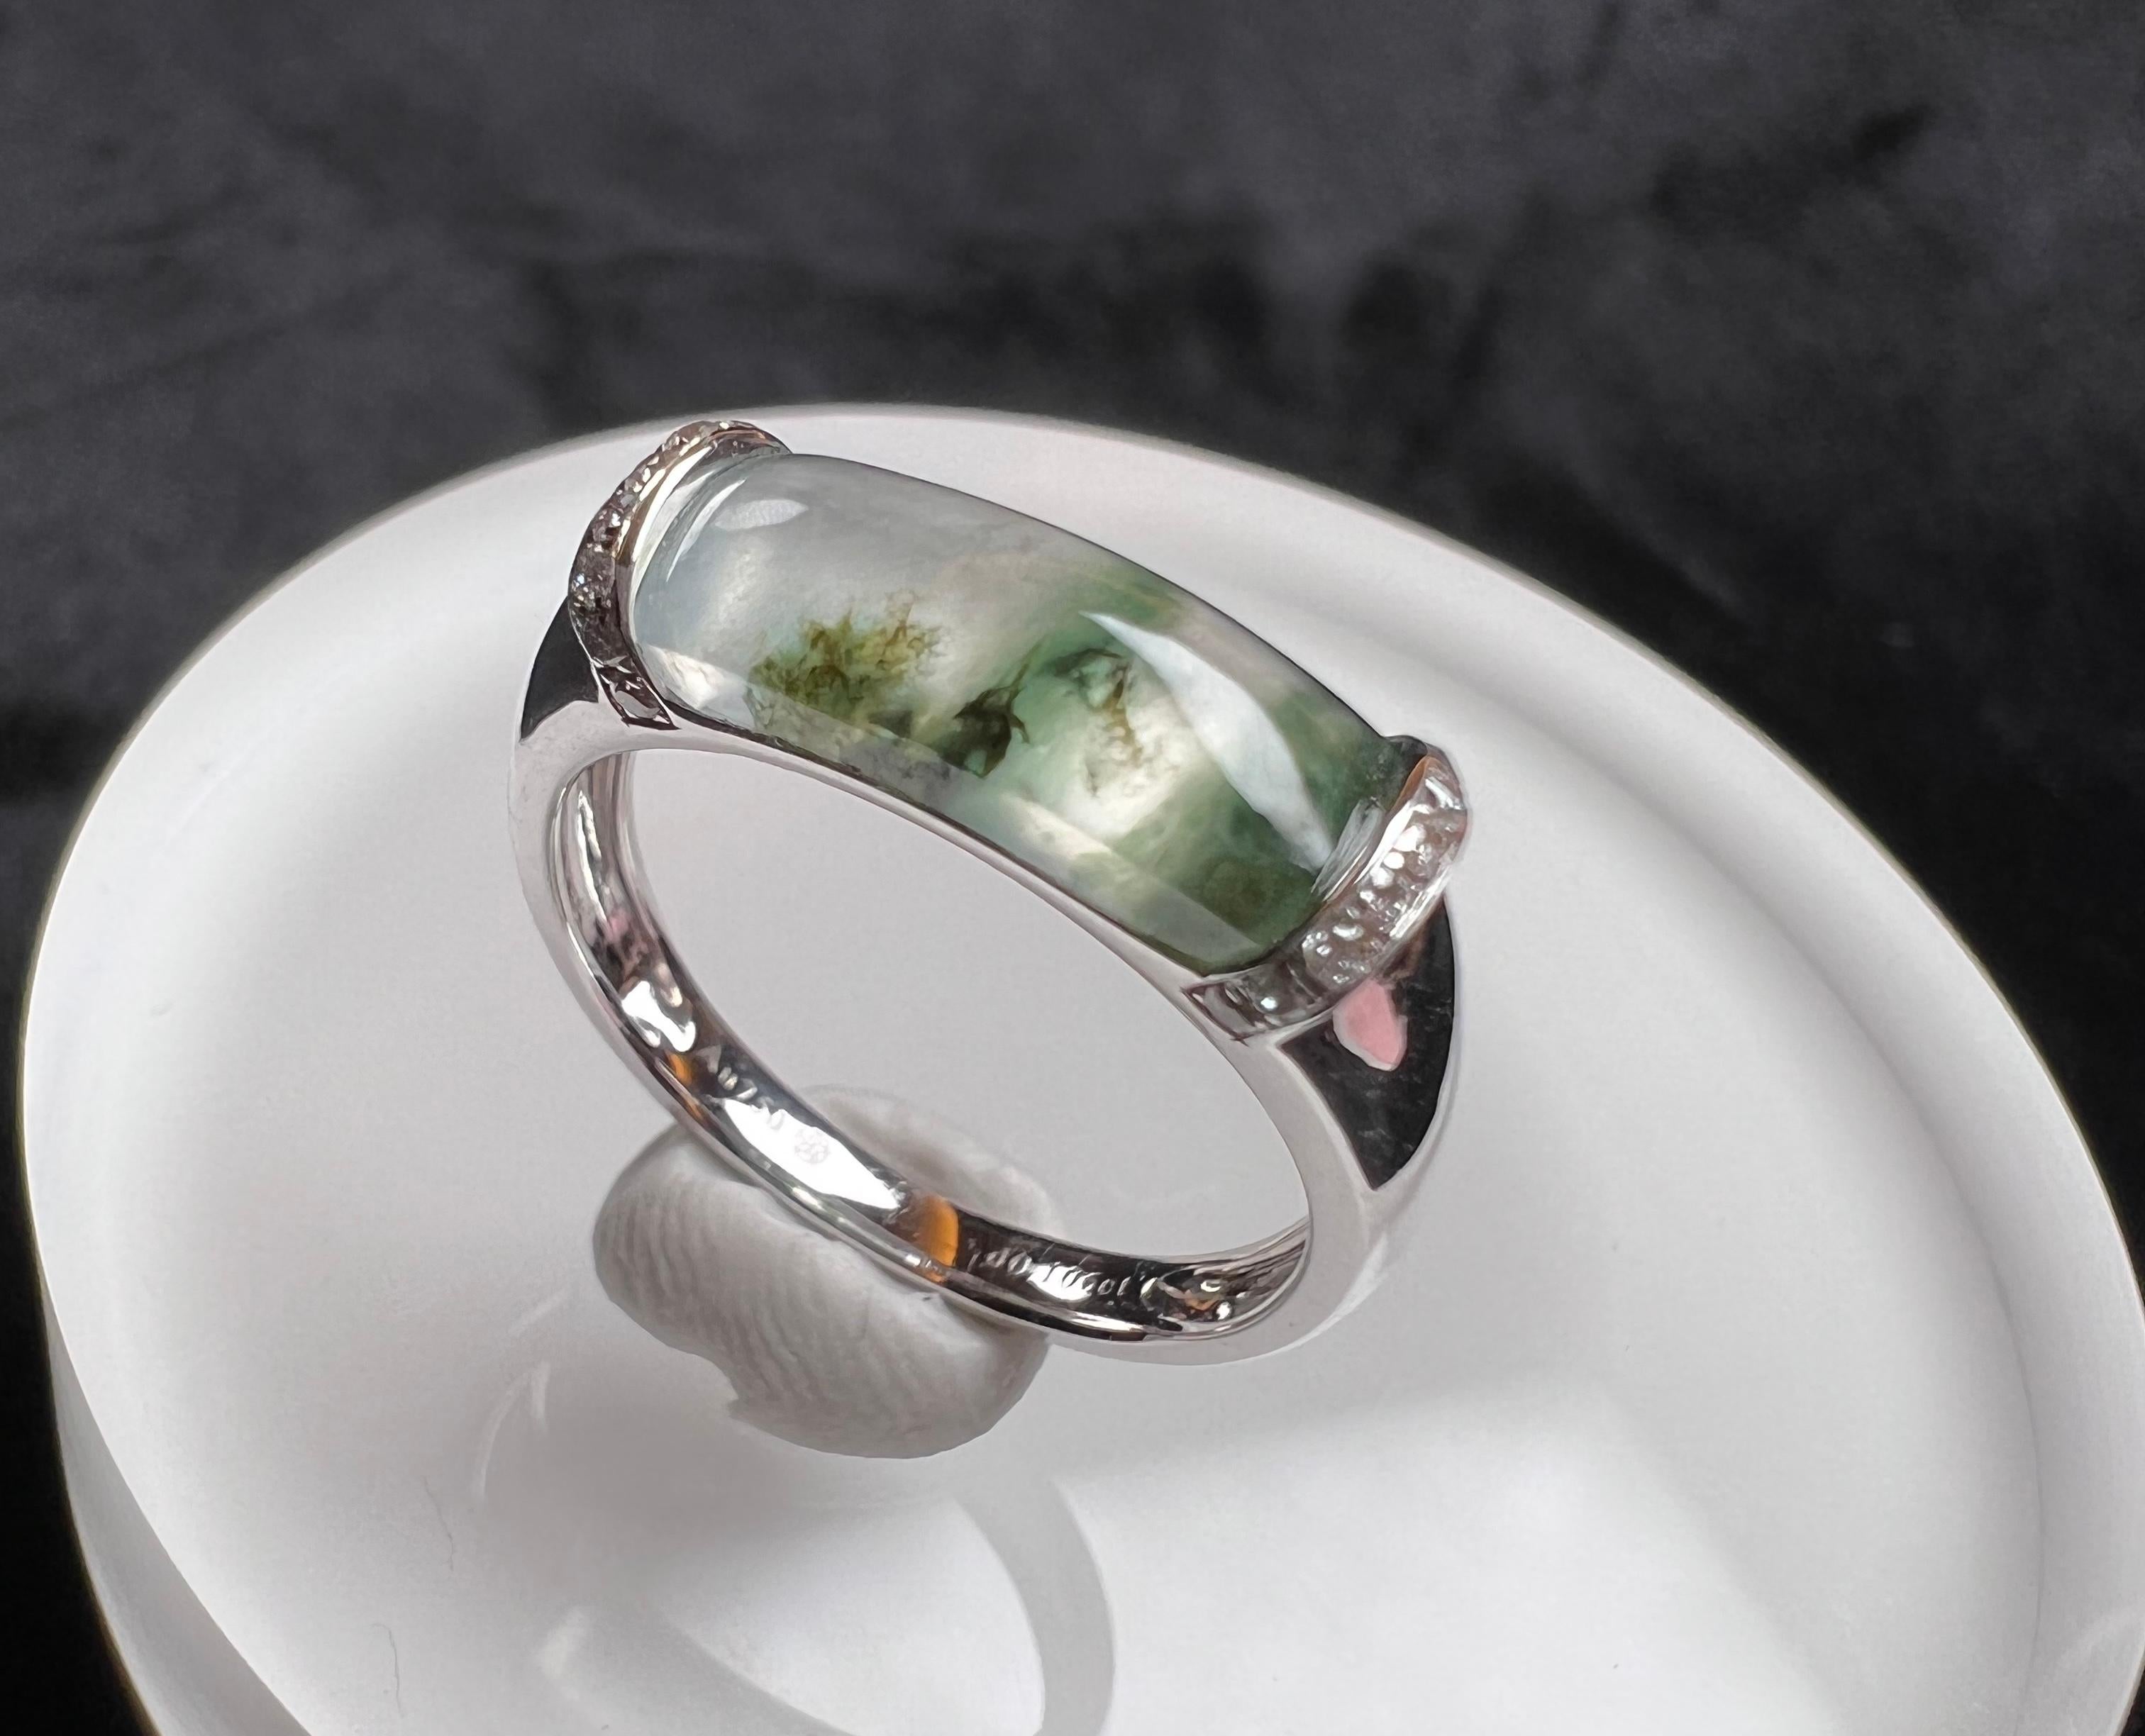 18K White Gold Icy Floating Flower Jadeite Ring, Cocktail Ring

Total weight (approx.): 2.9g
Centre setting measurement (approx.): 13.9*5.6mm

This ring is resizable.
Get in touch with us to know more details and your shipping options.

The 18K